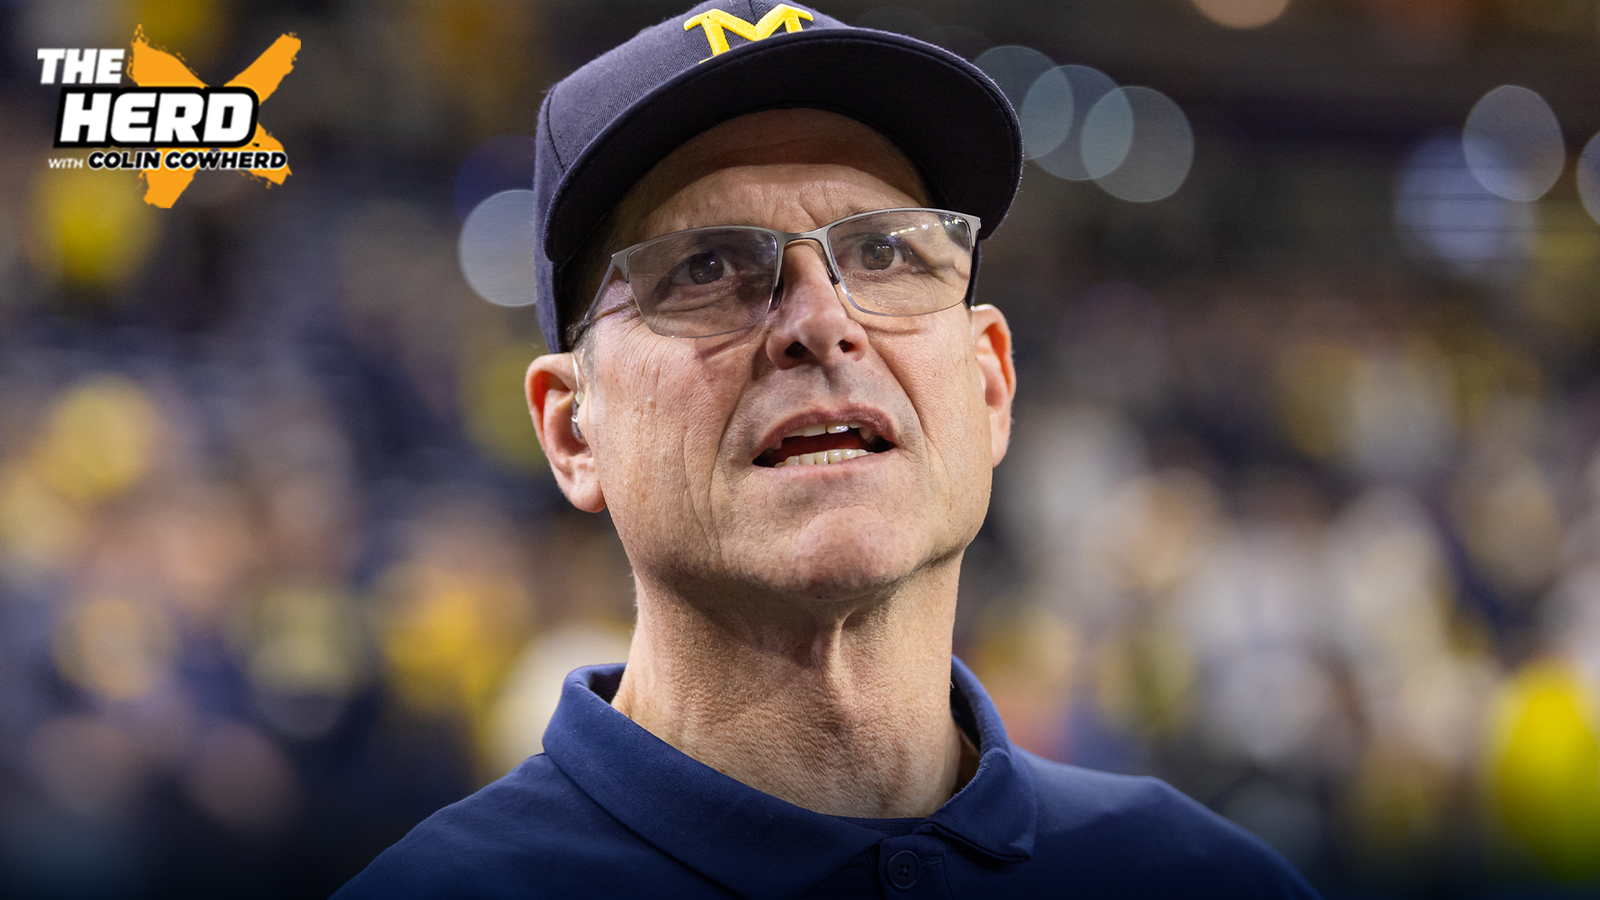 Michigan coach Jim Harbaugh hires NFL agent ahead of Rose Bowl | The Herd